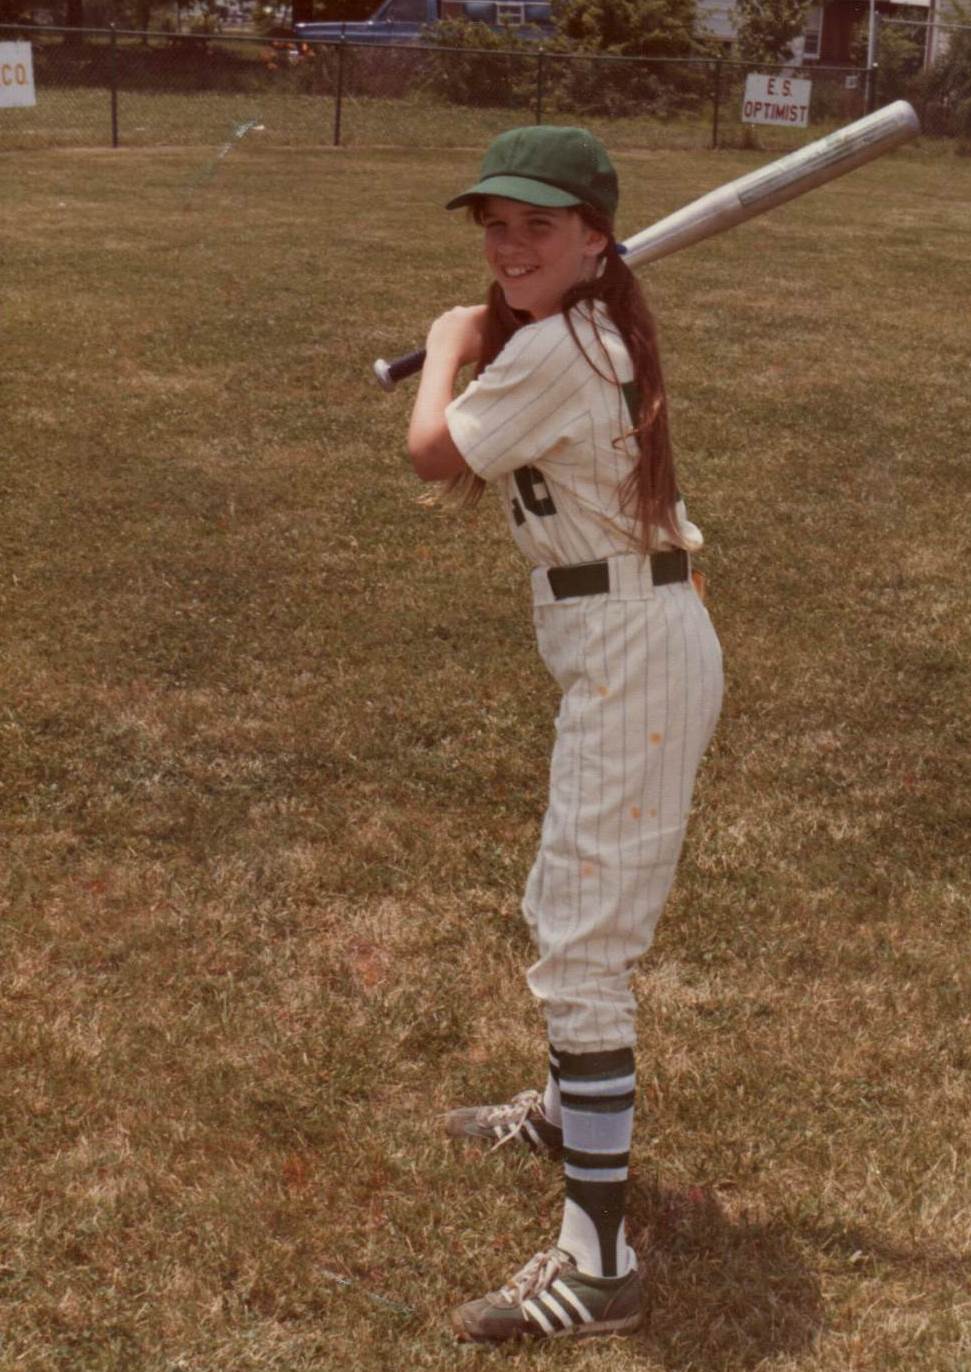 Sandy as a young girl in her baseball uniform.